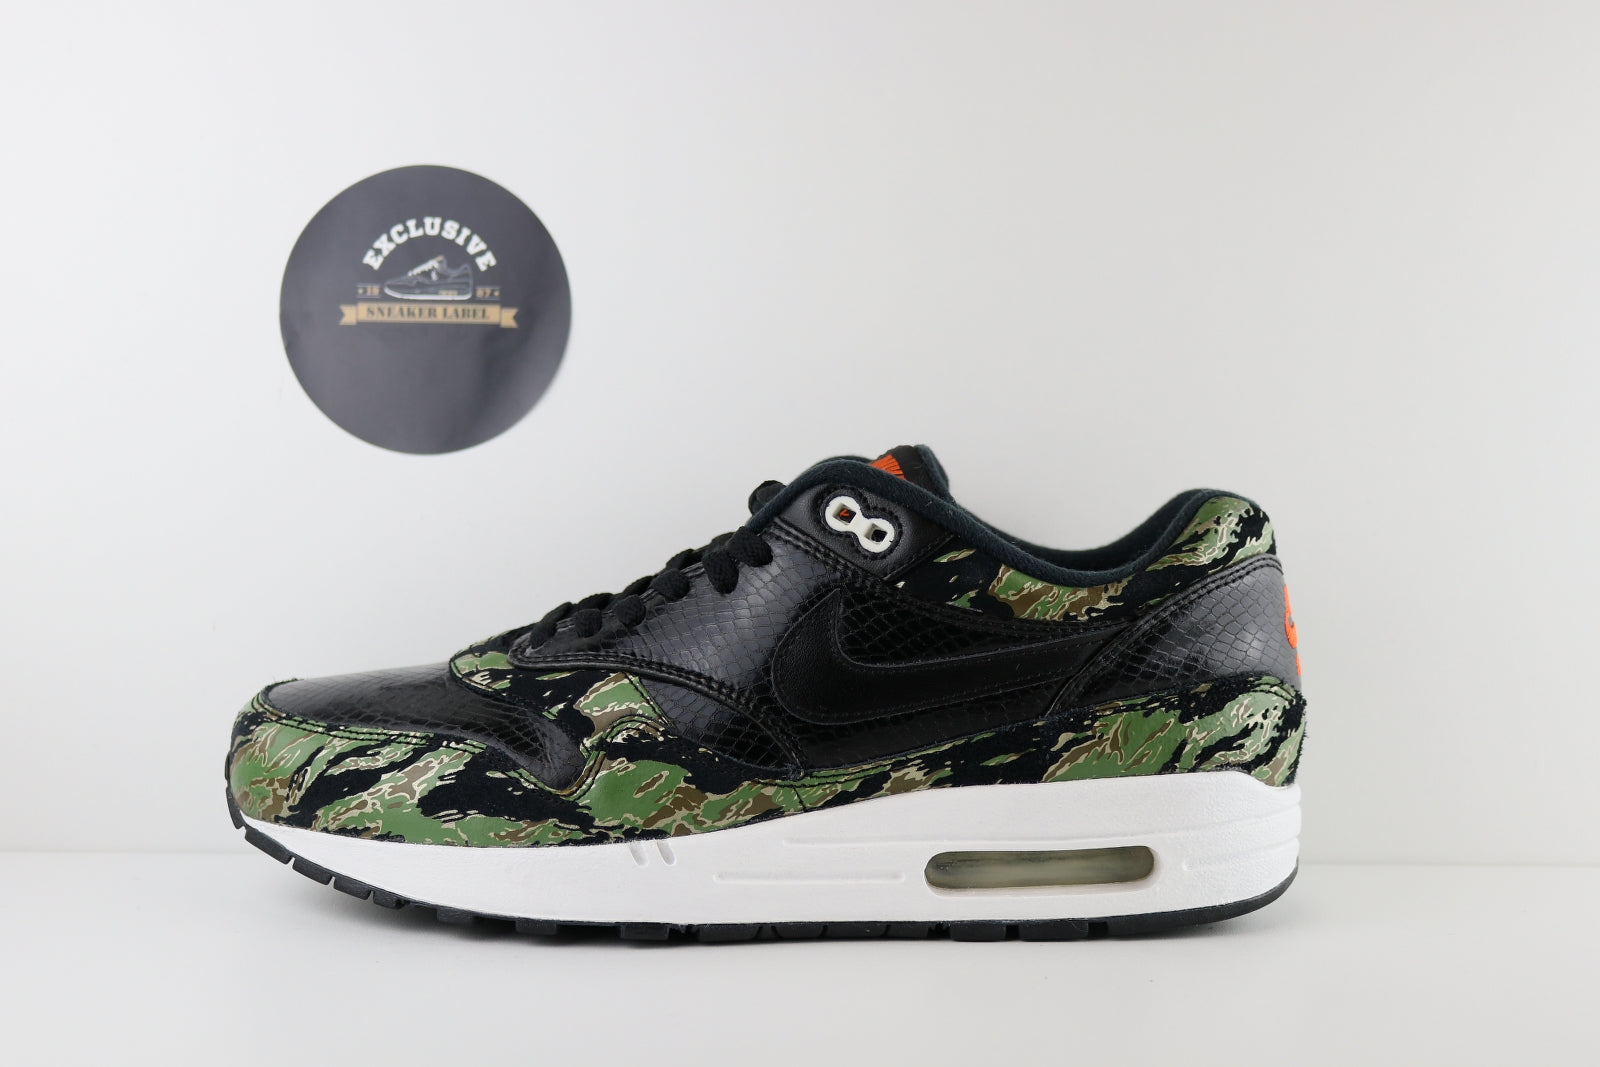 Moedig Cokes Scully Nike Air Max One: Atmos Tiger Camo SnakeSkin EU : 43 Rare Pair – Exclusive  Sneaker Label